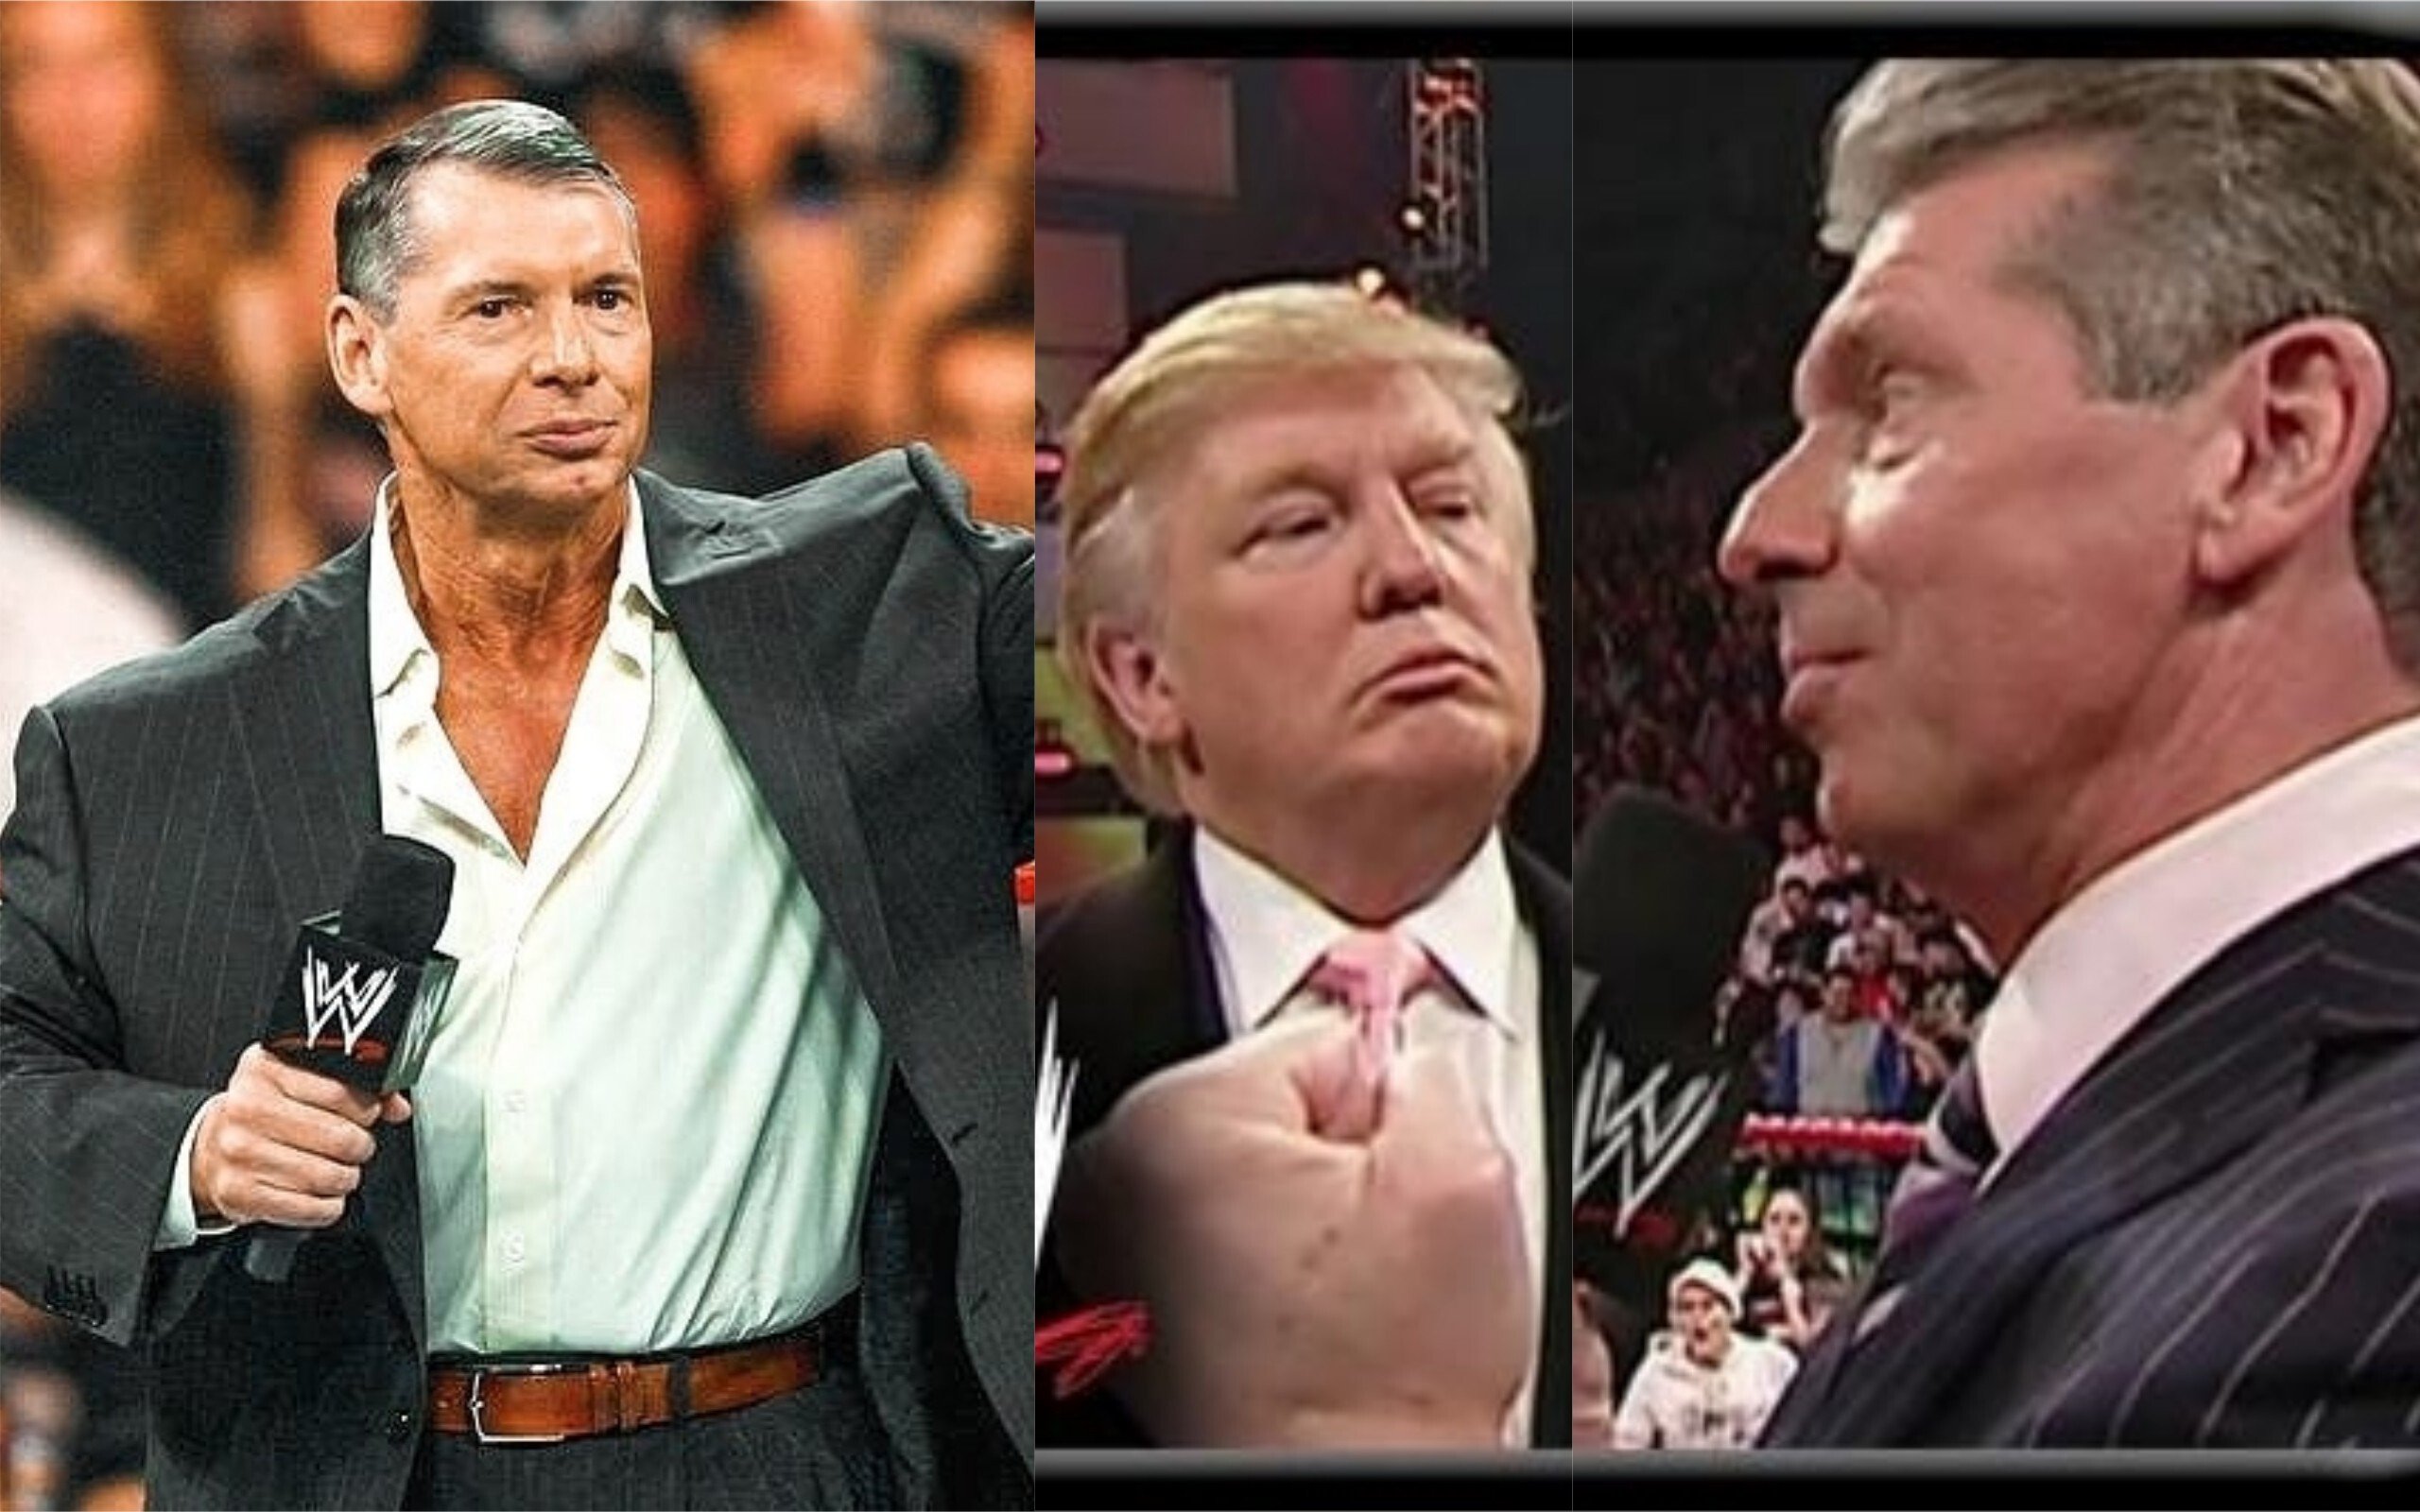 Vincent McMahon has been described as encapsulating “a thuggish old-school CEO”. Photos: @likeamcmahon/Instagram; @DailyWWENews/Twitter